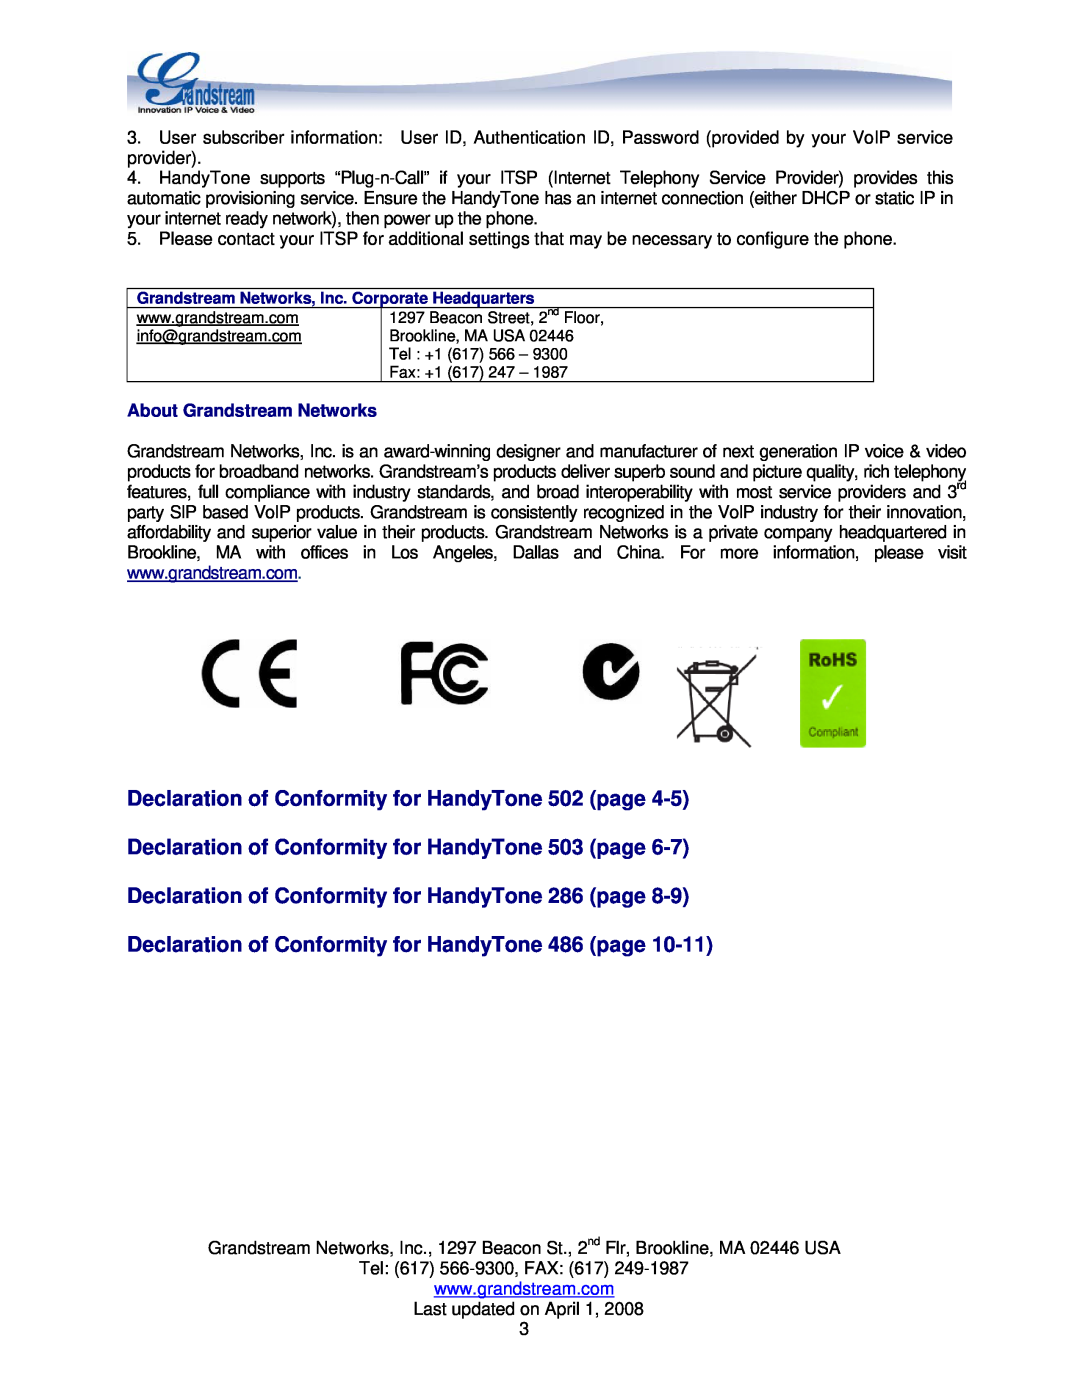 Grandstream Networks HANDYTONE 503 manual Declaration of Conformity for HandyTone 502 page, About Grandstream Networks 